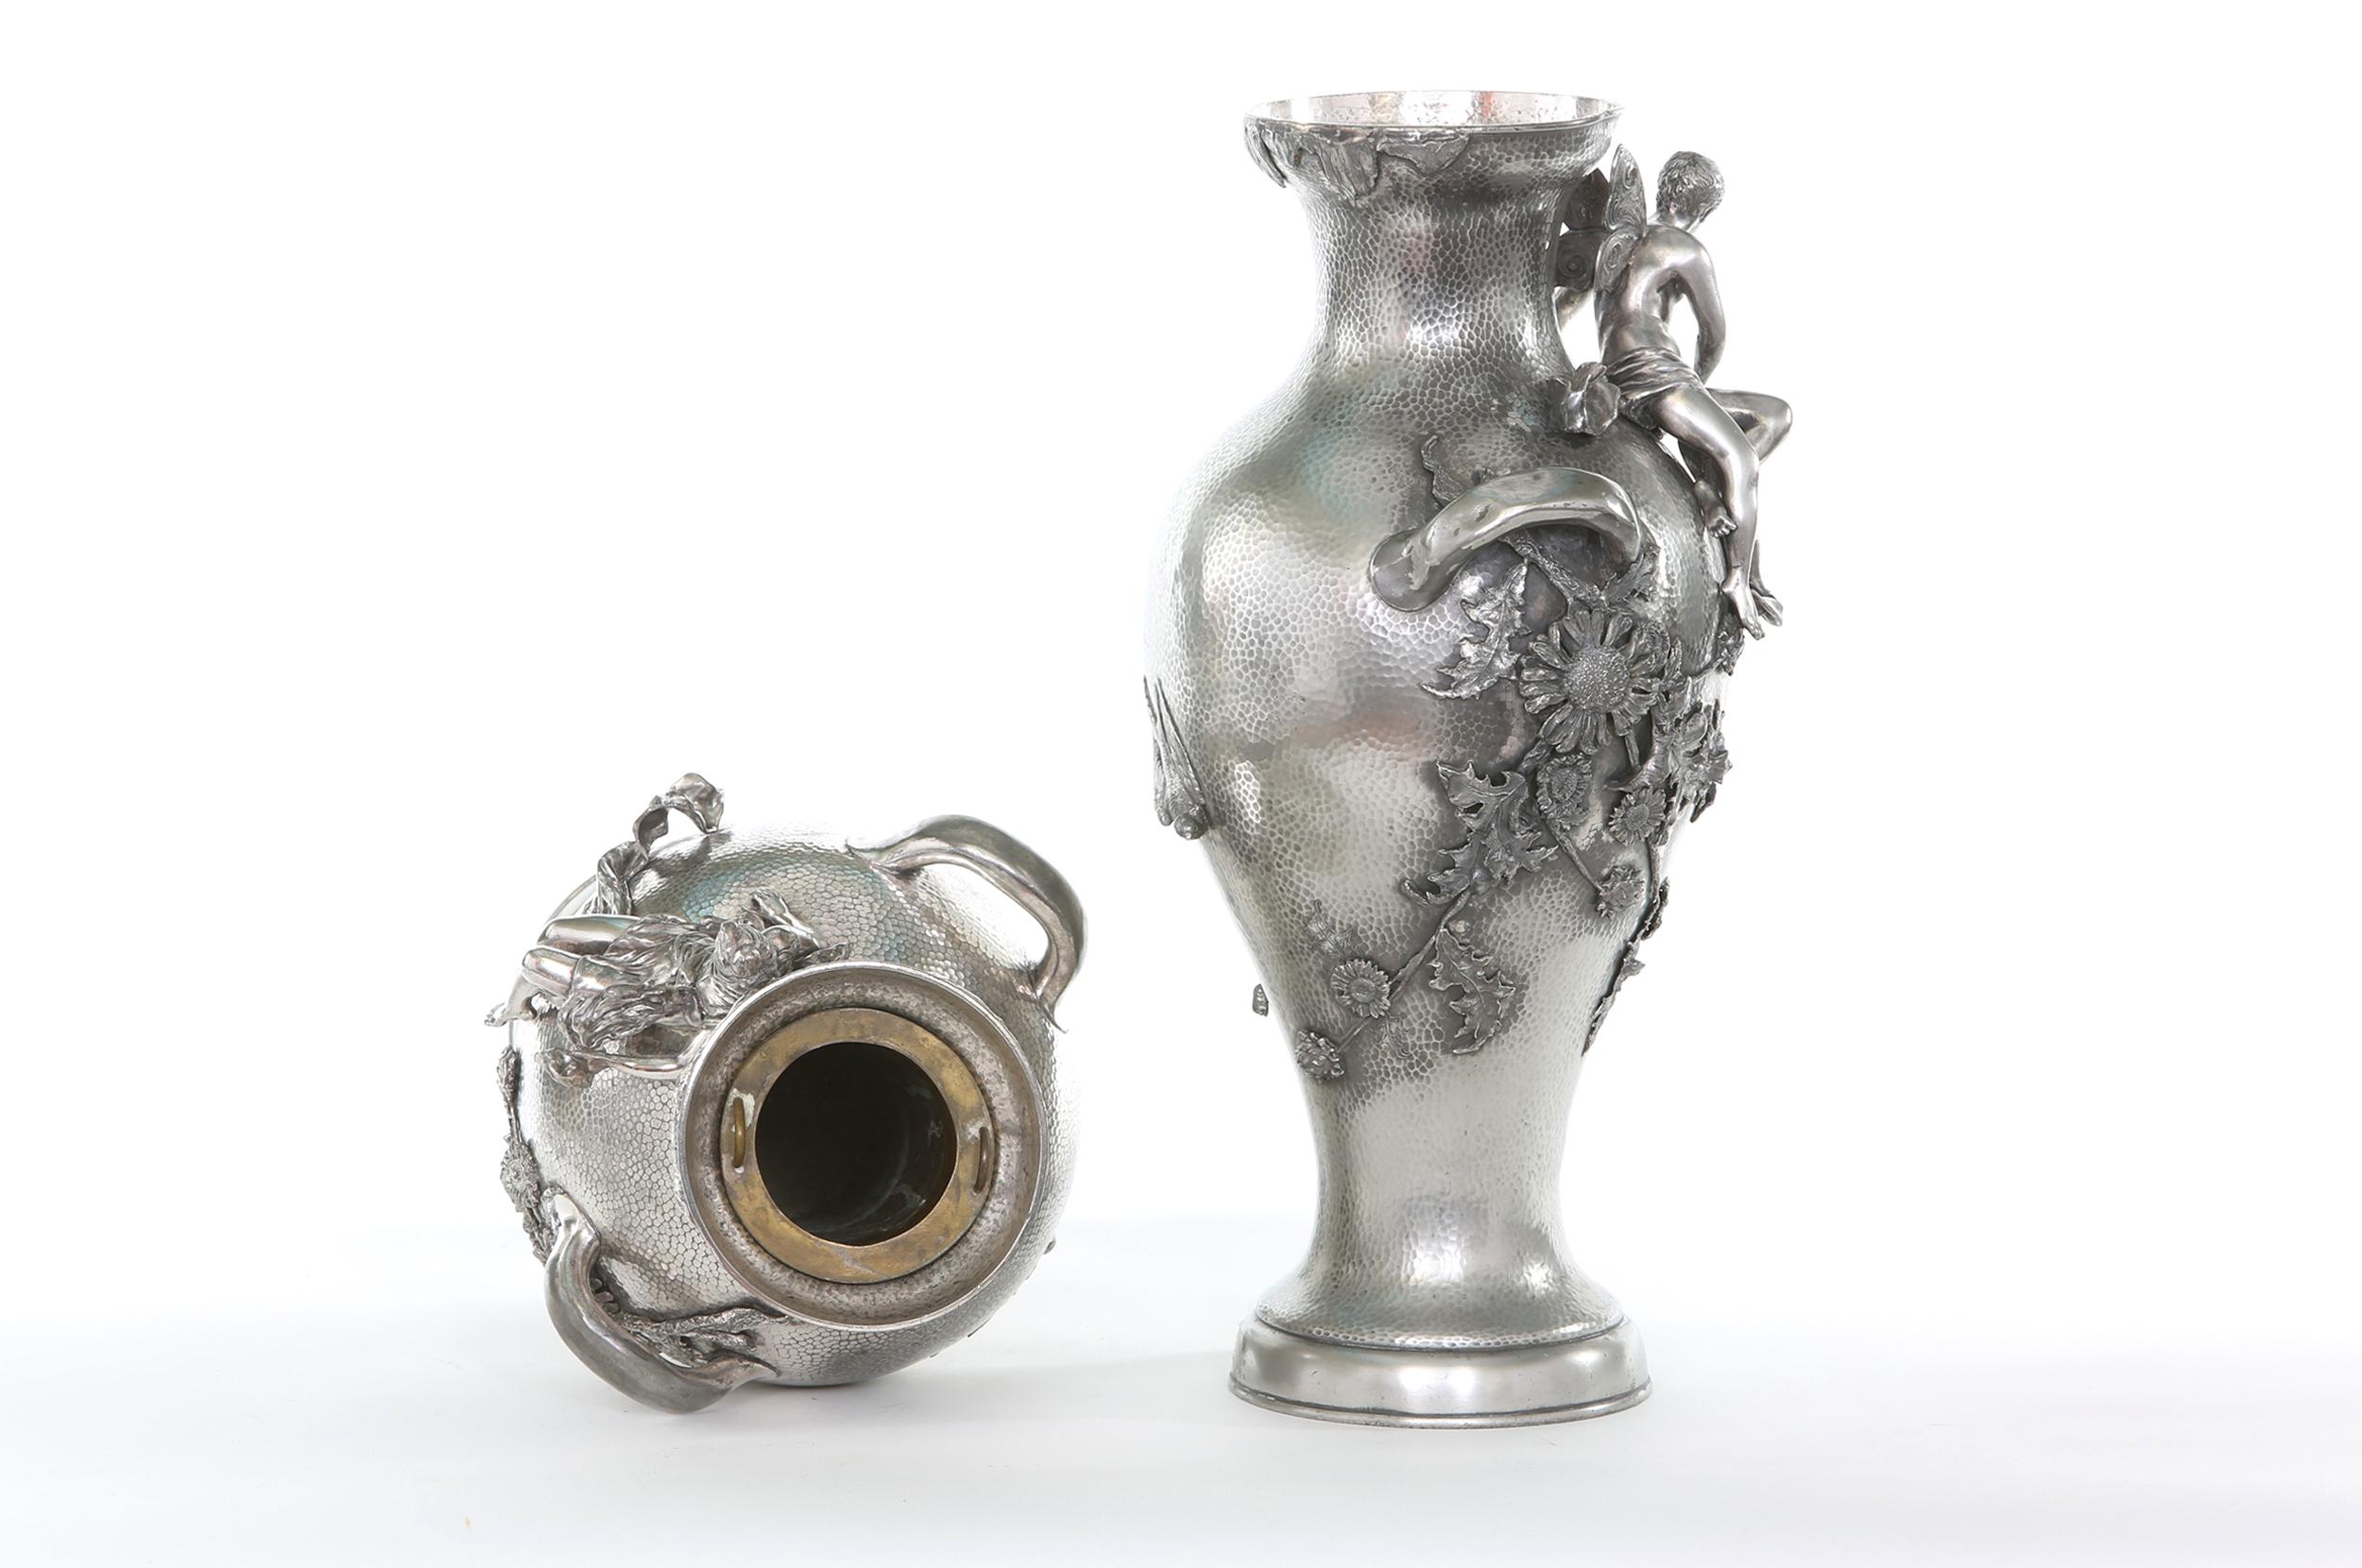 Hammered Late 19th Century Silver Plated Pair of Vases / Urns For Sale